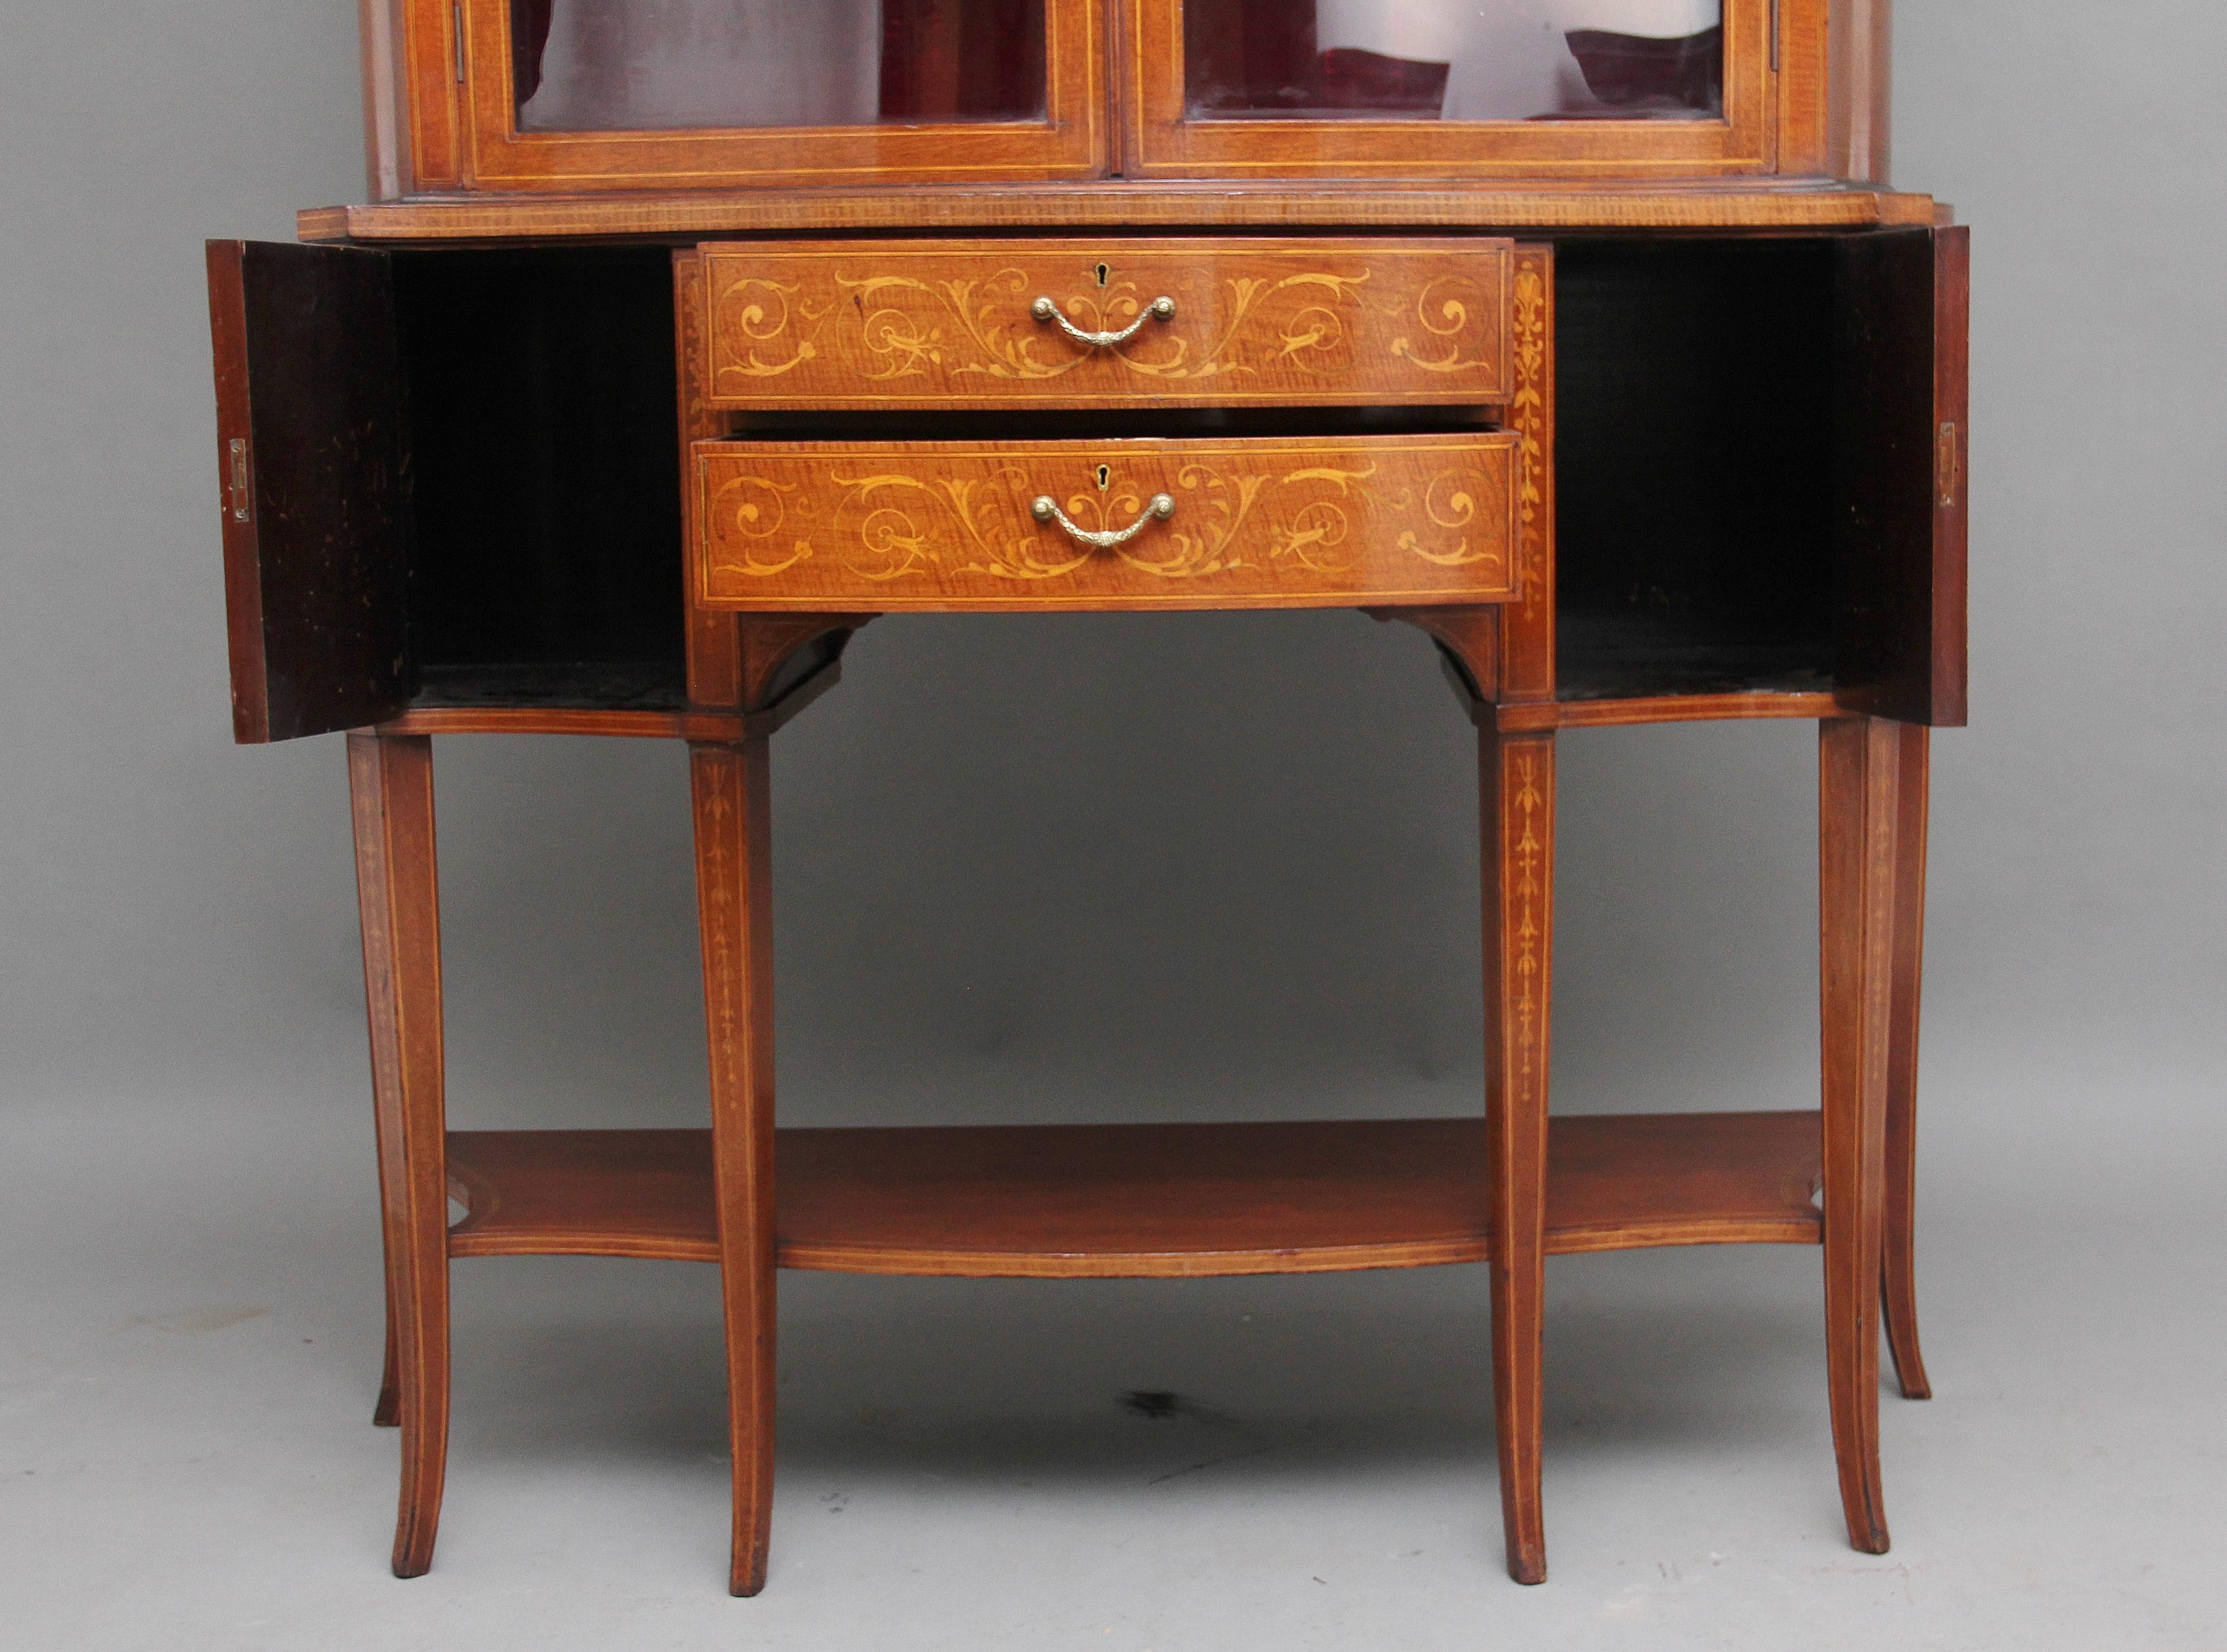 Late 19th Century 19th Century Inlaid Mahogany Display Cabinet For Sale